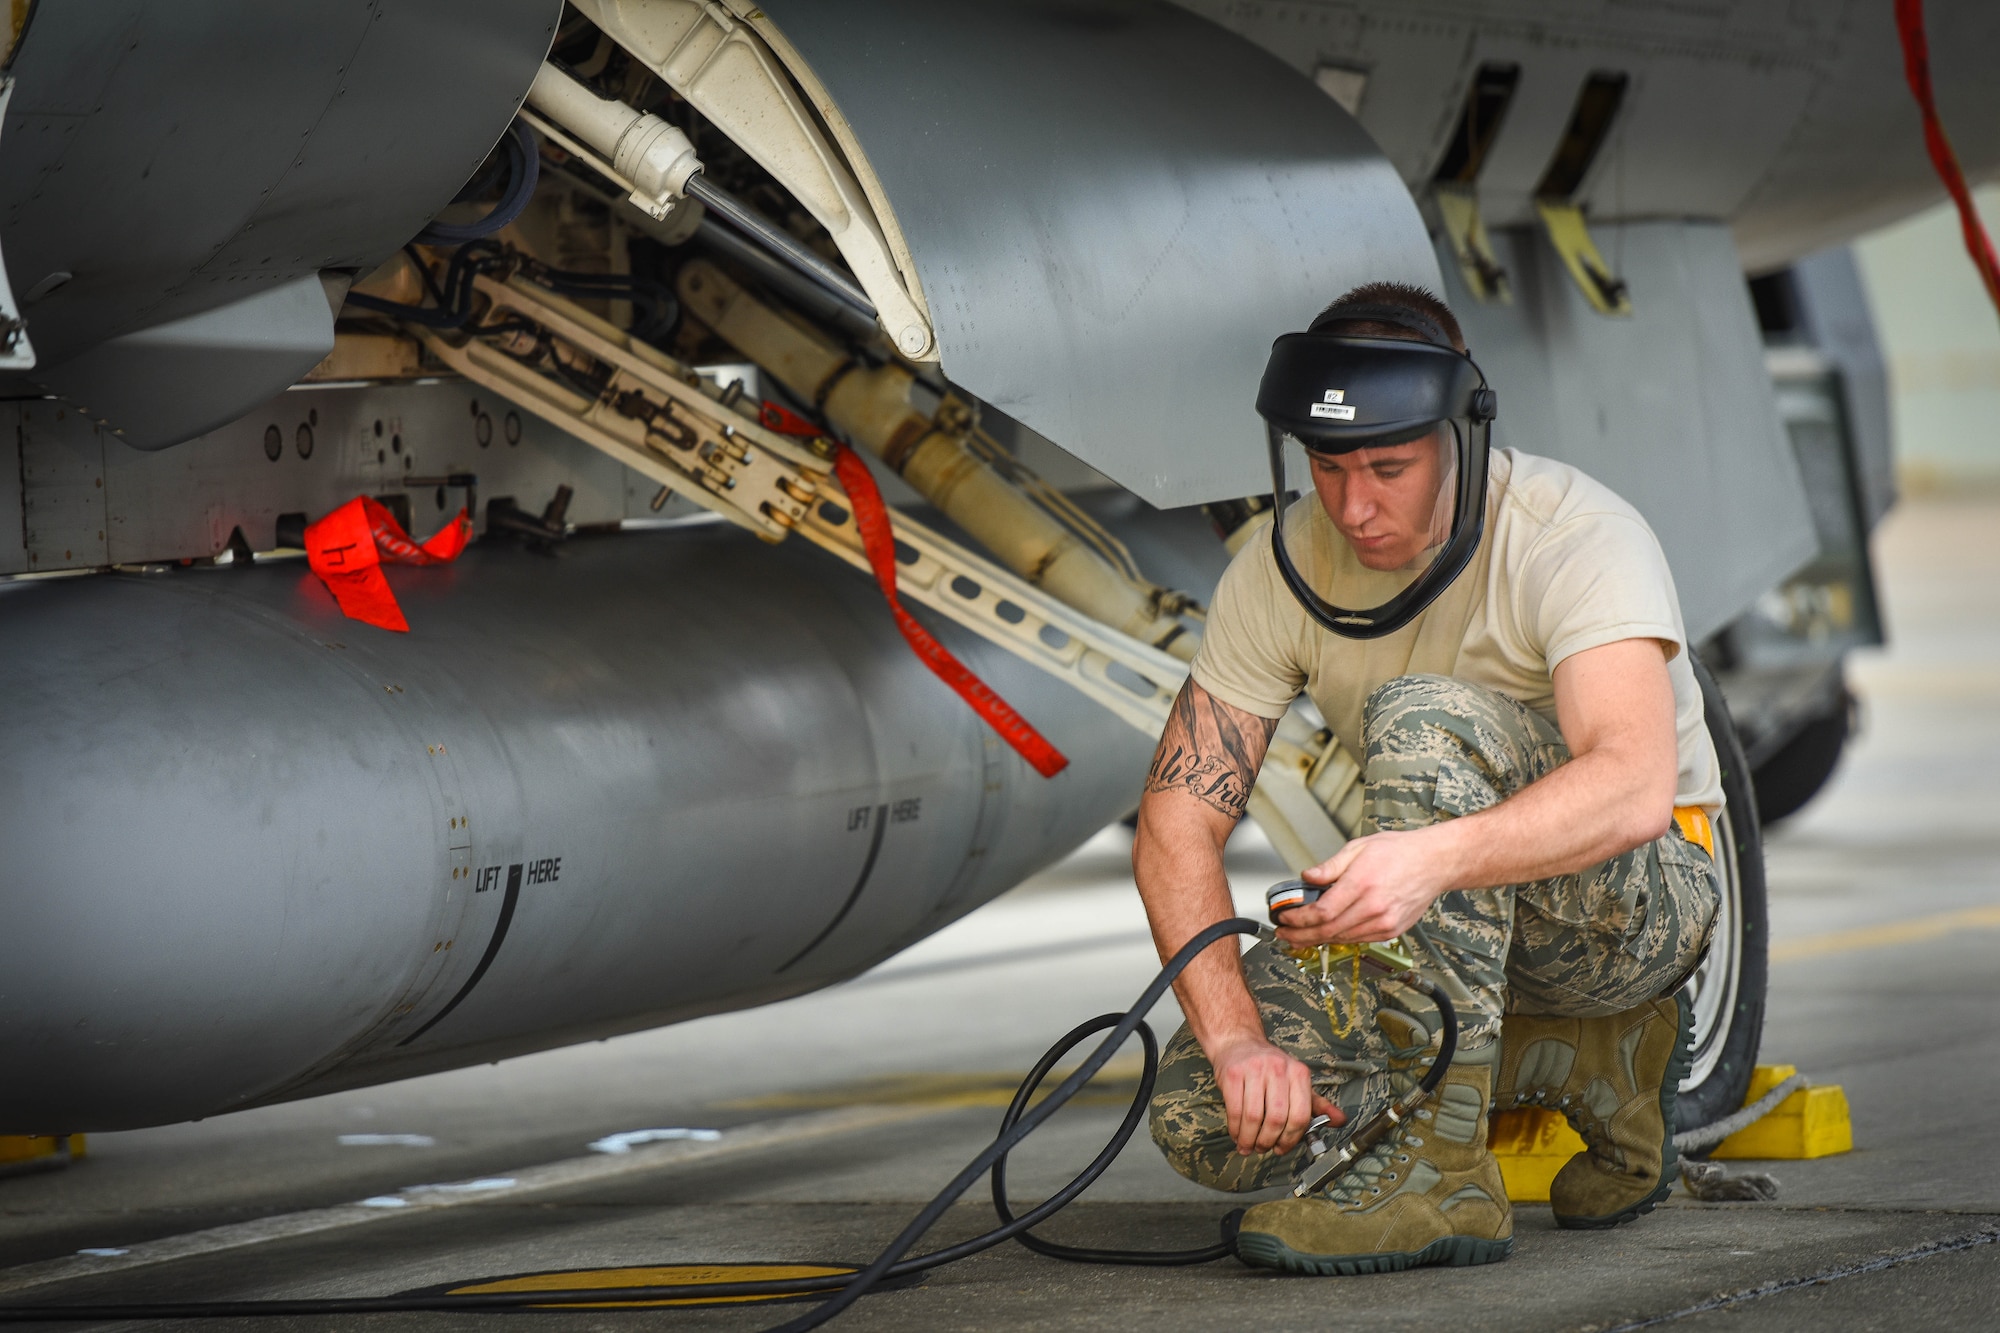 Senior Airman Josh Miller, a crew chief with the 180th Fighter Wing, inflates tires of an F-16C on the flight line of Naval Station Key West, Boca Chica Island, Florida, Jan.12, 2015. The 180th Fighter Wing deployed to Key West, Florida to conduct dissimilar aircraft training with F-5’s from the Naval Station Key West and F-15’s from the 159th Fighter Wing, from New Orleans, Louisiana. (Air National Guard photo by Staff Sgt. Amber Williams/Released)